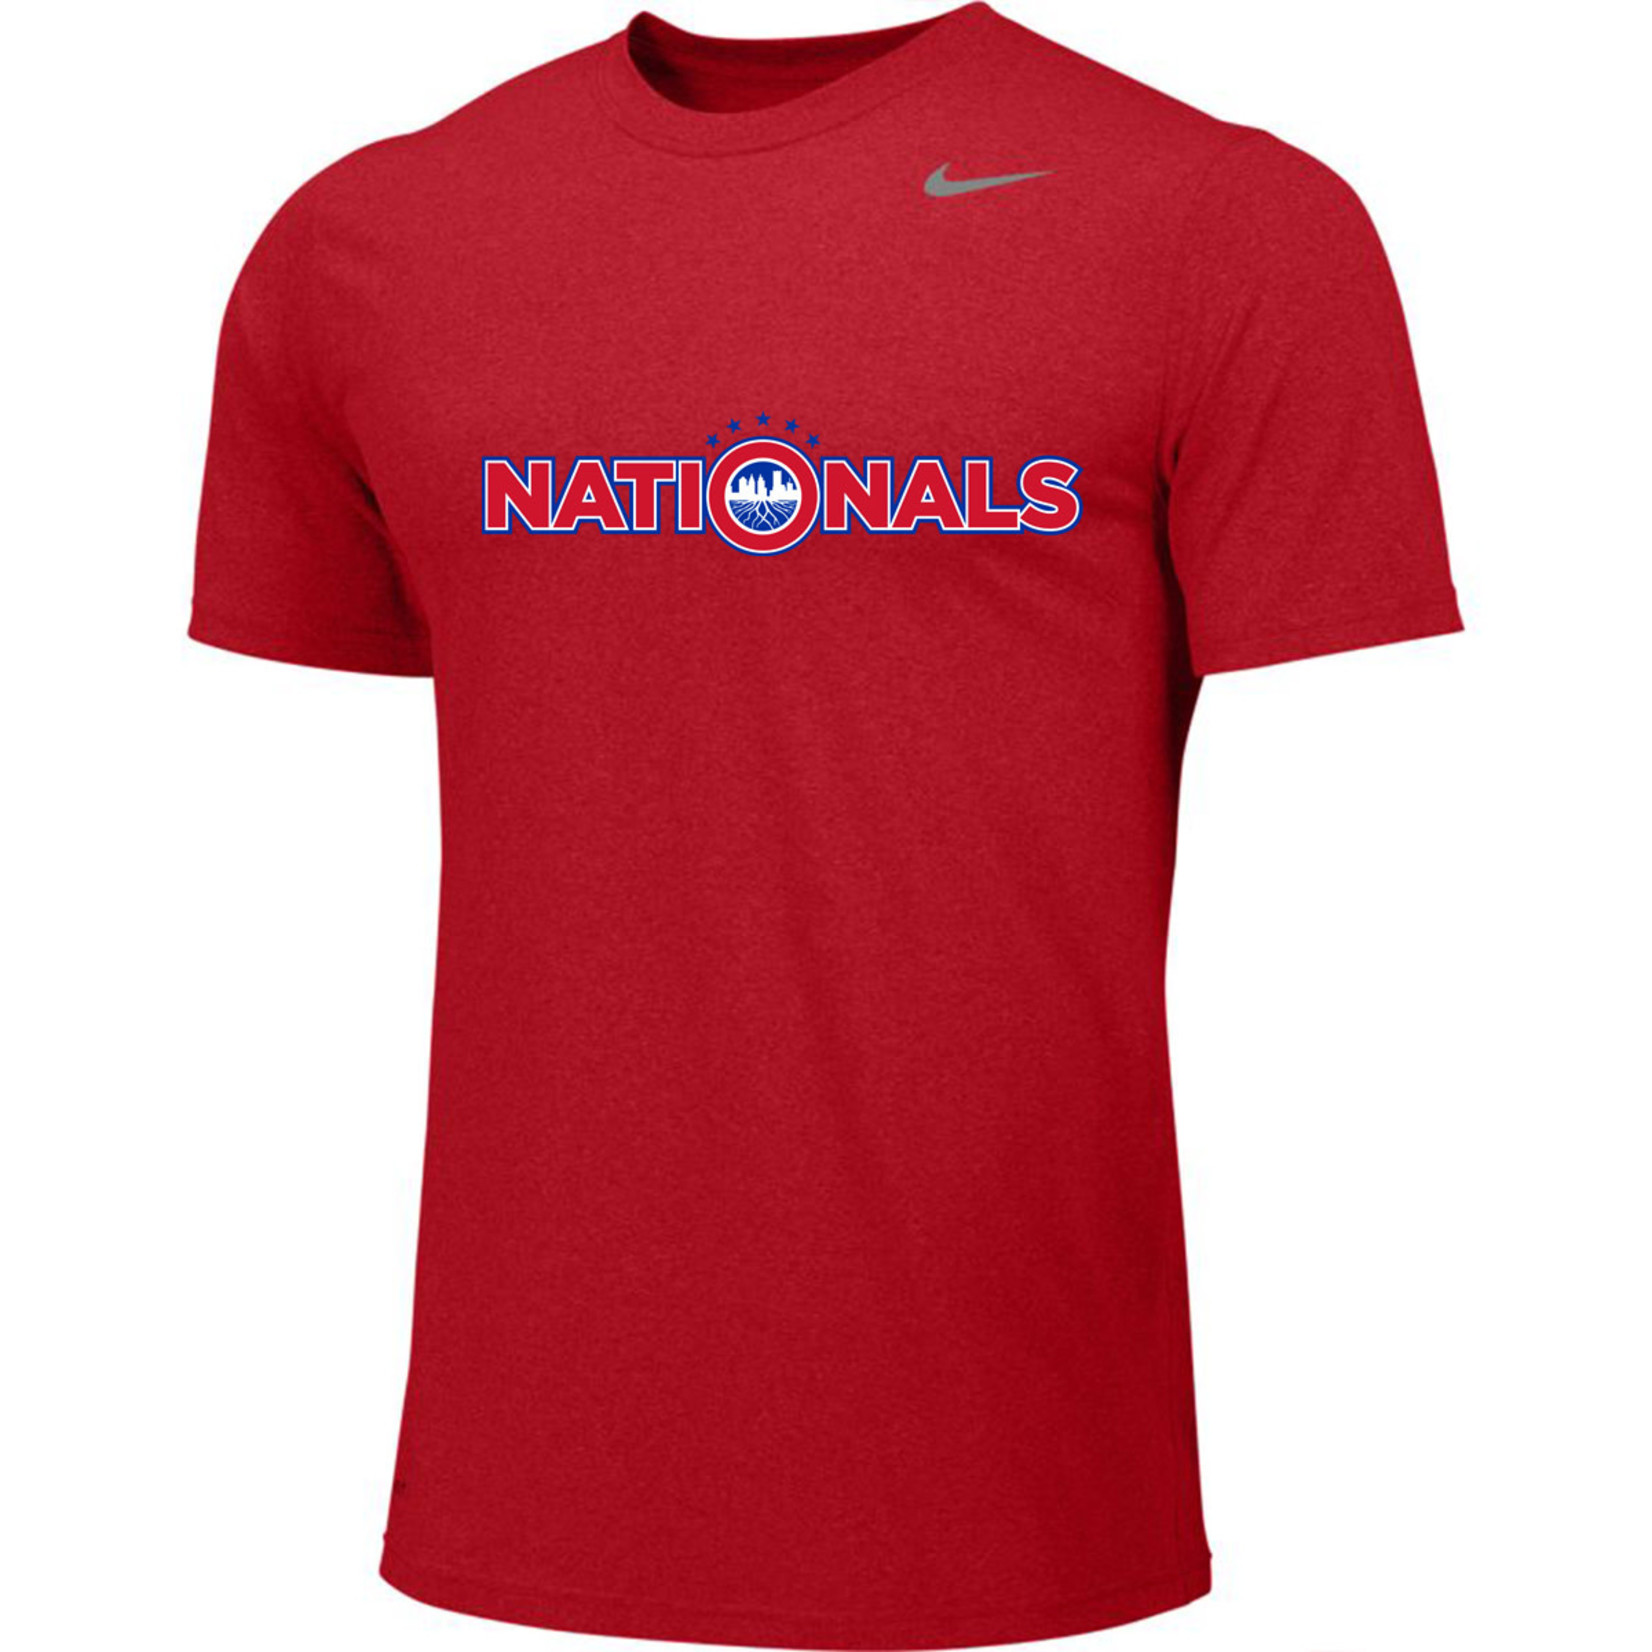 NIKE NATIONALS LEGEND TEE (RED)